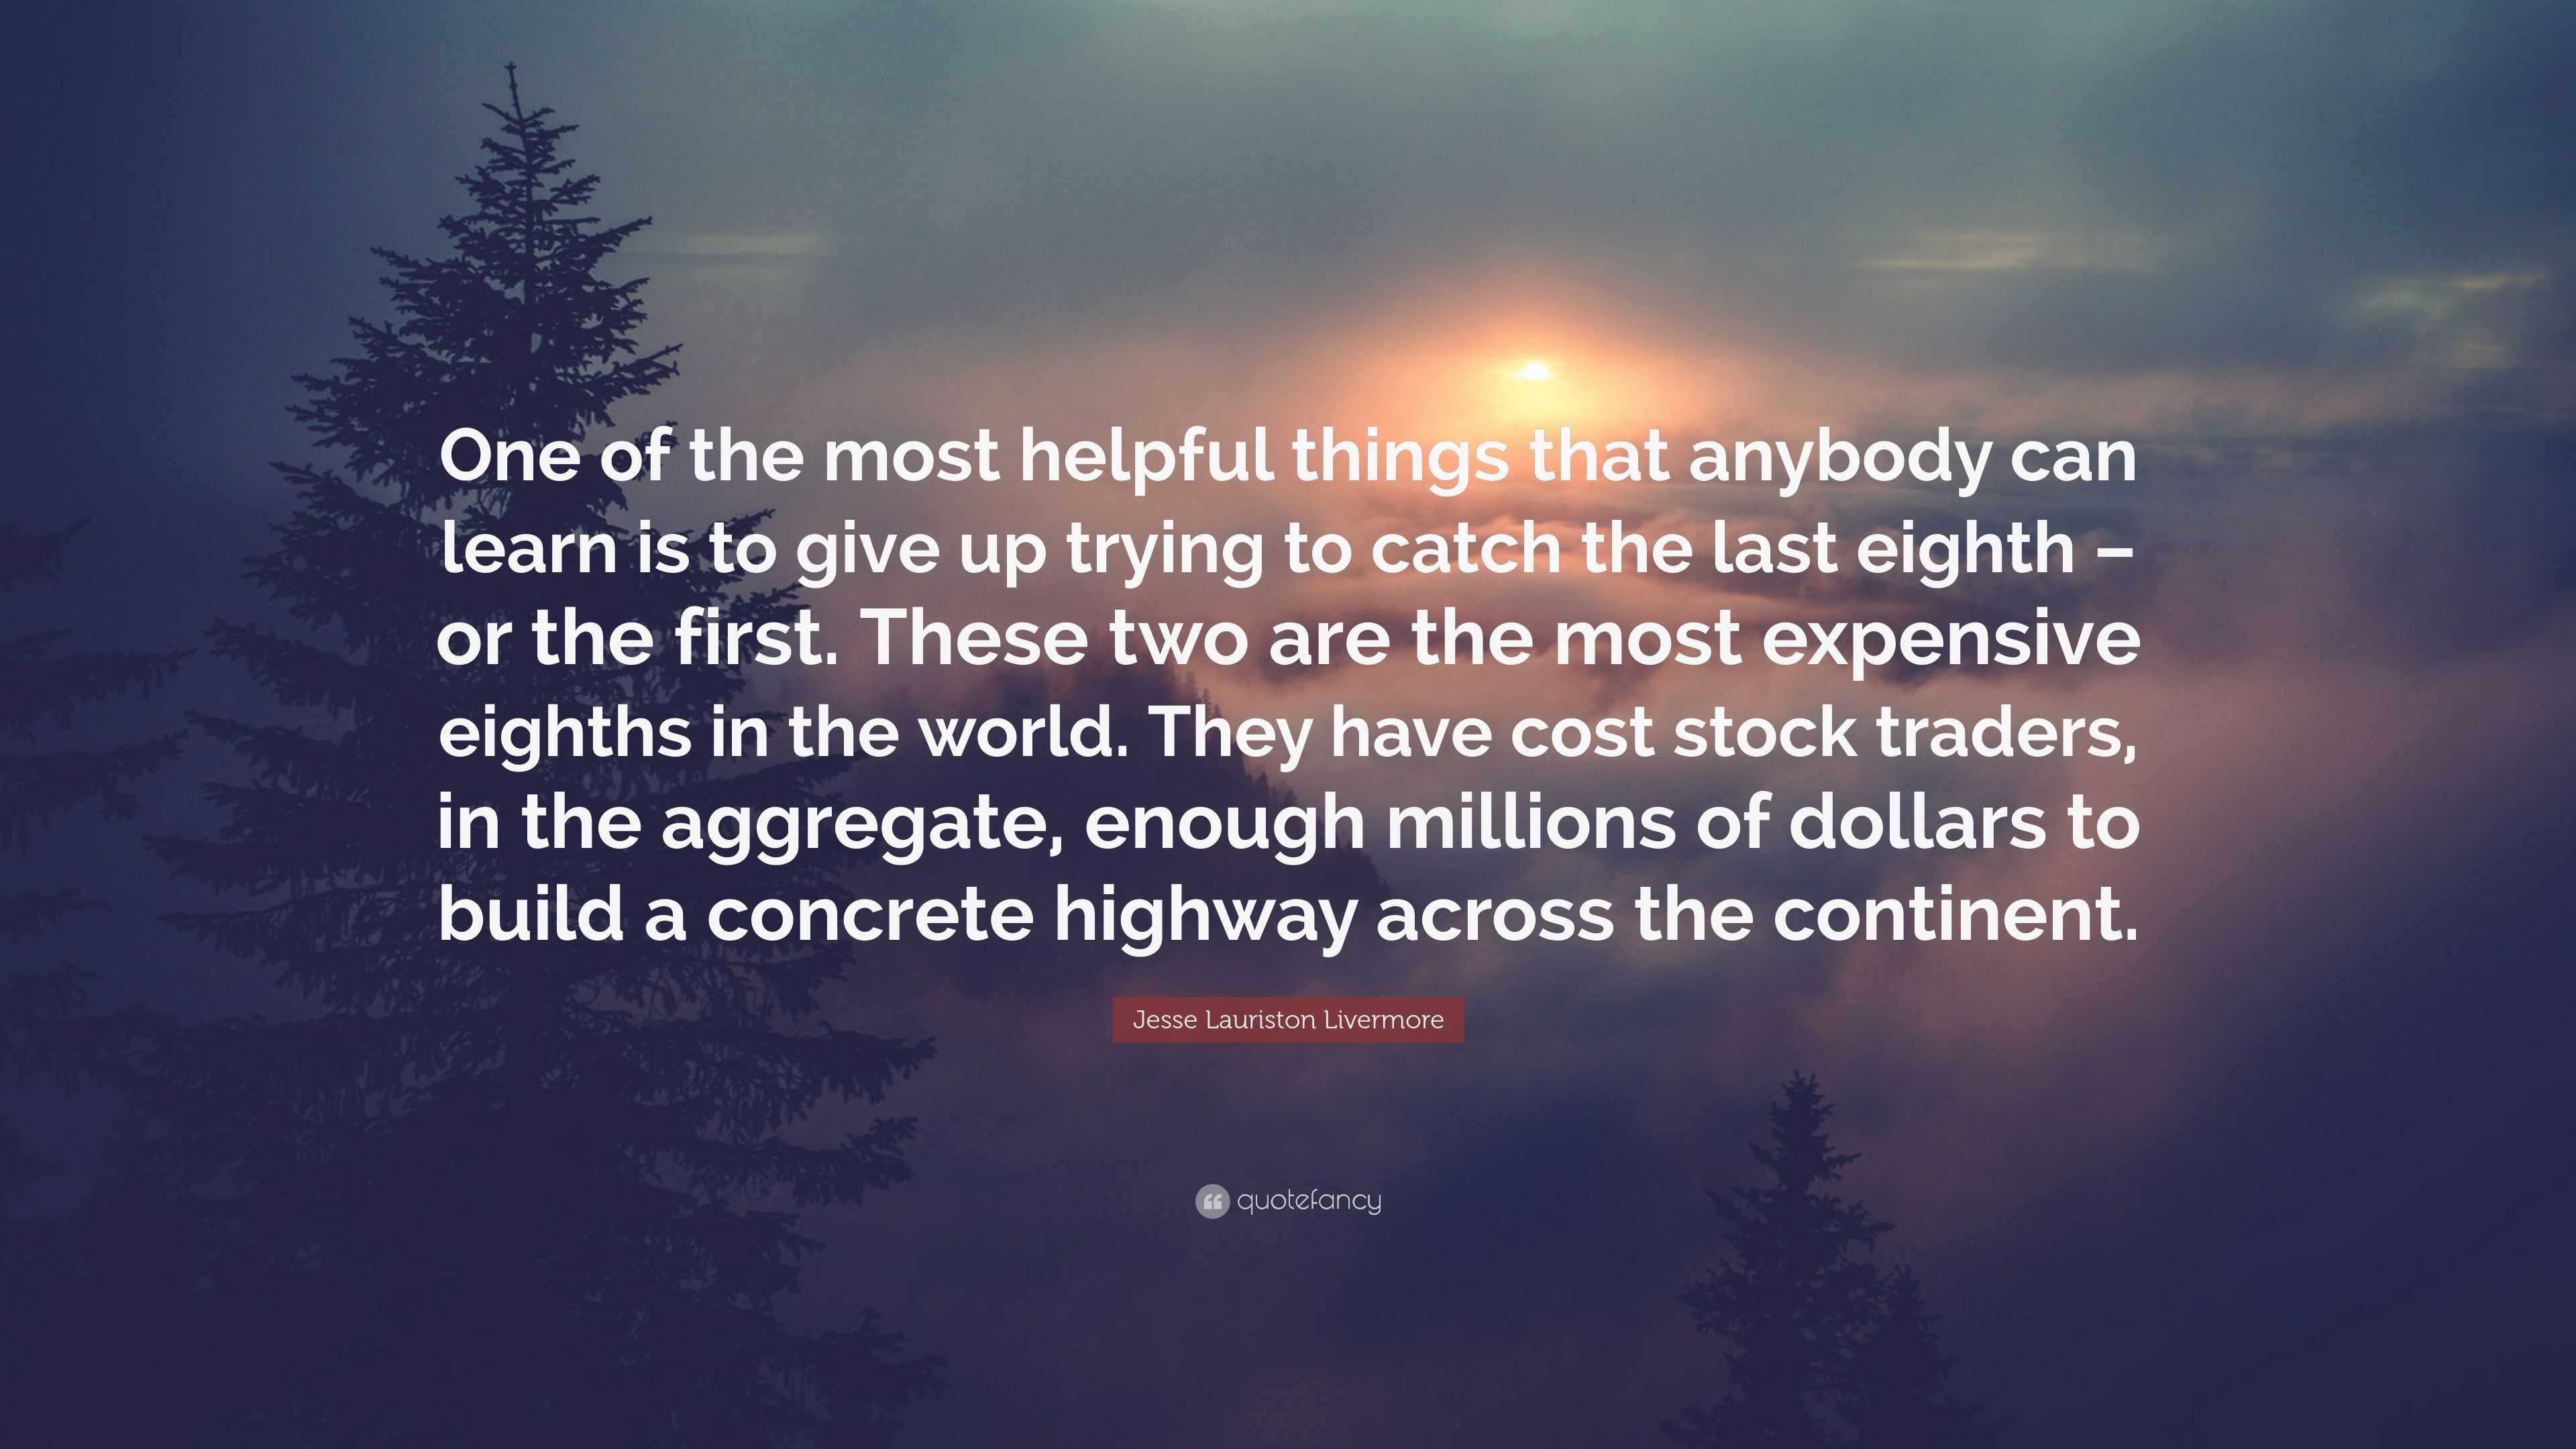 Jesse Lauriston Livermore Quote: “One of the most helpful things that ...